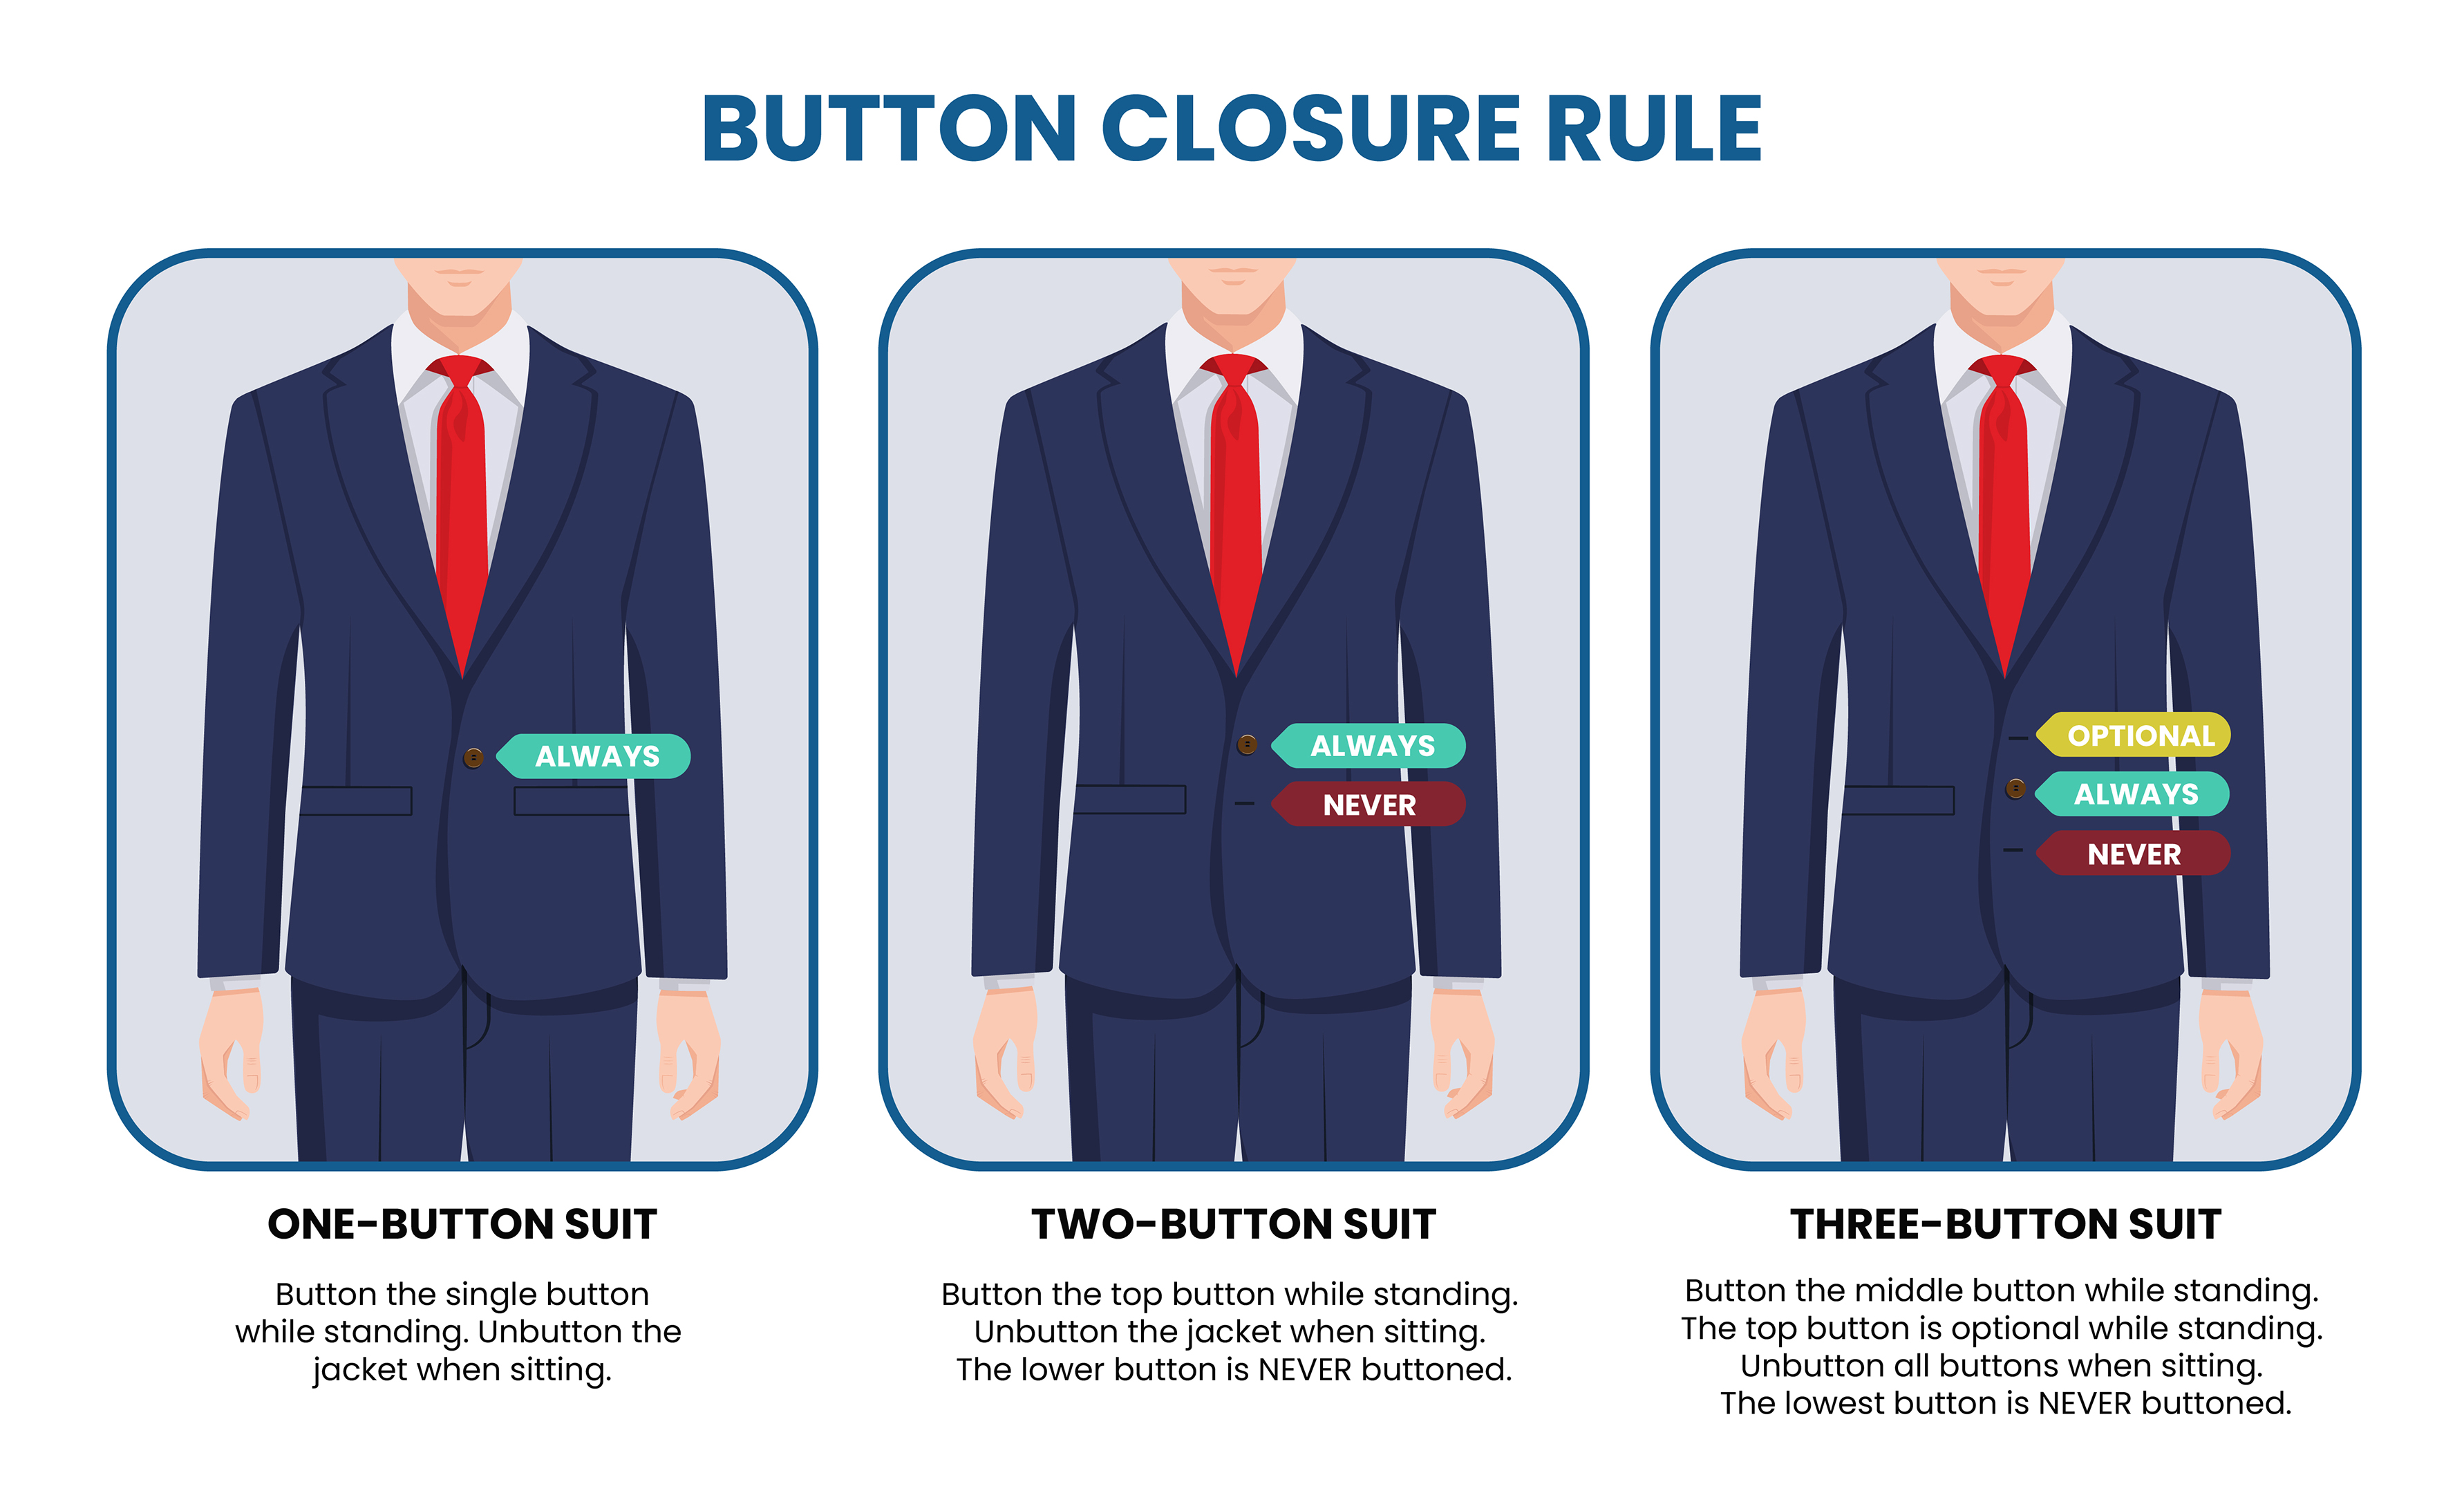 one vs. two vs. three button suits